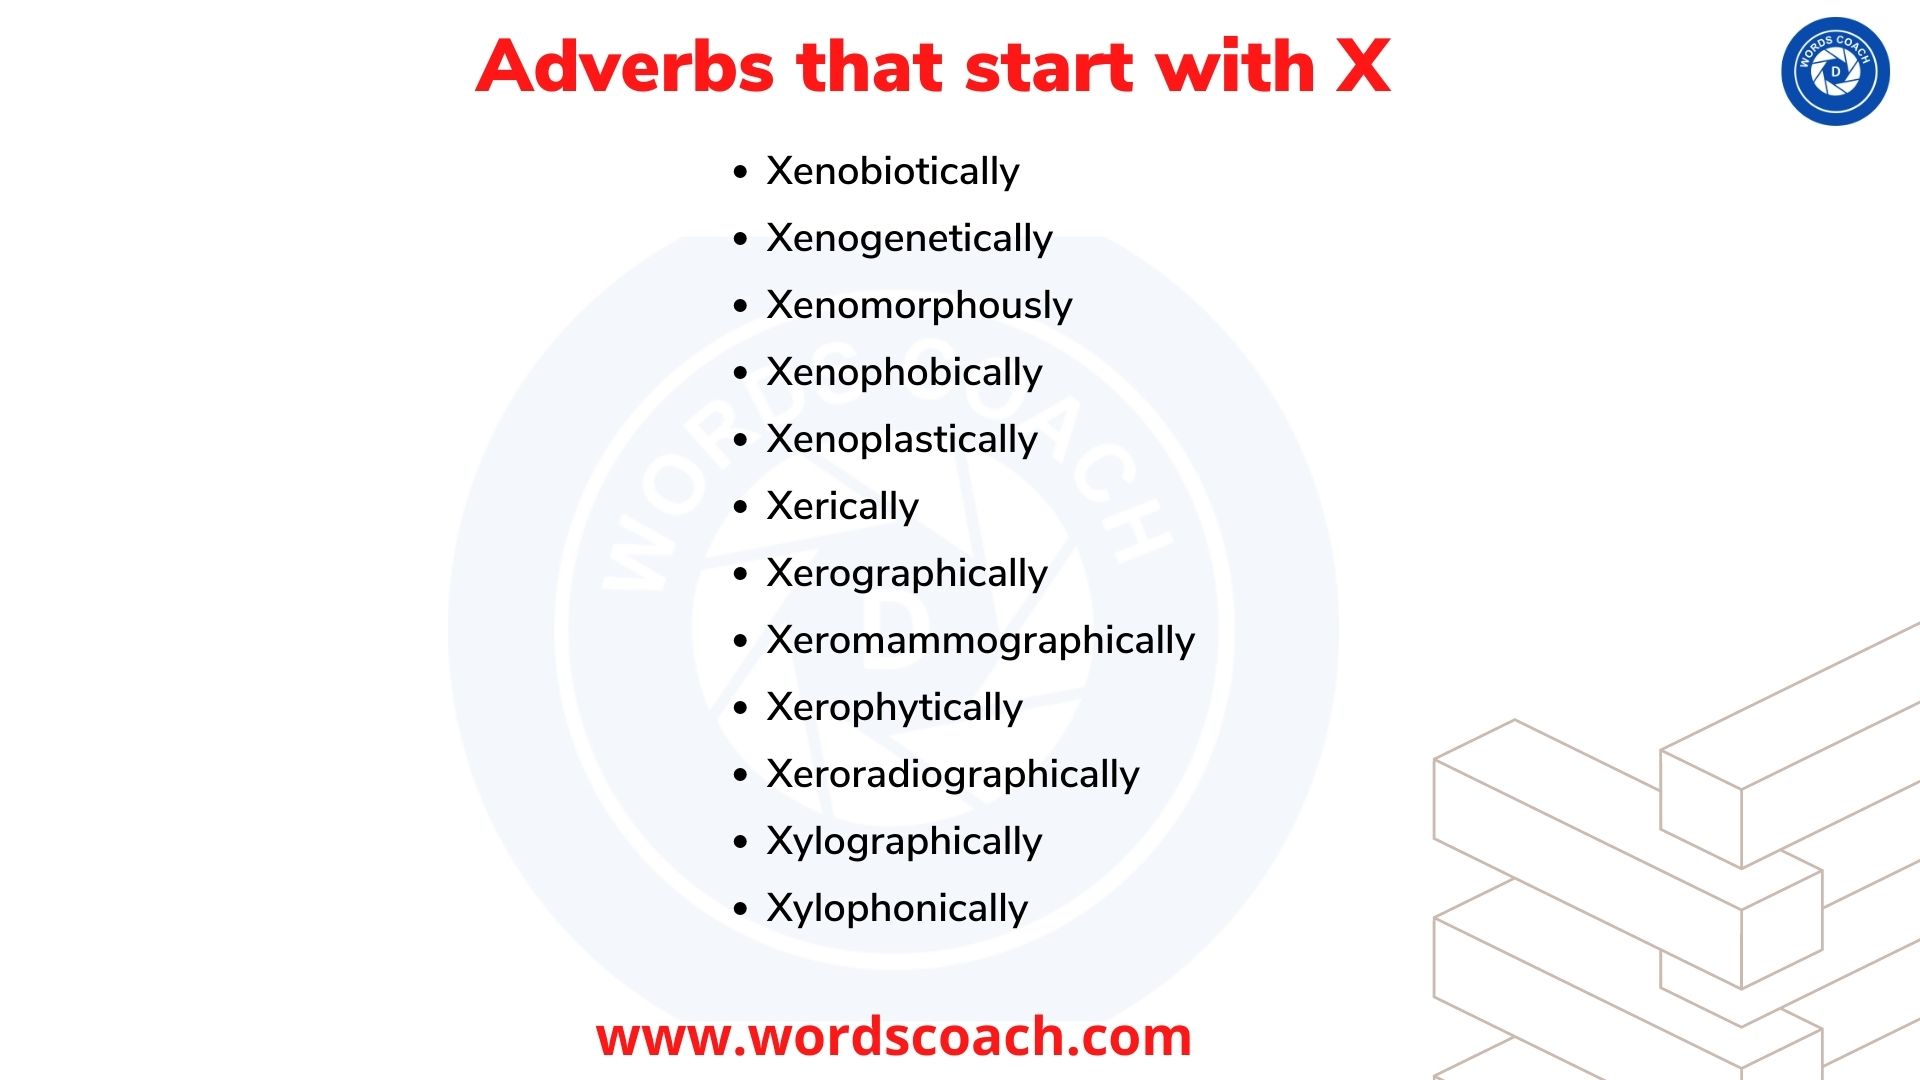 Adverbs that start with X - wordscoach.com